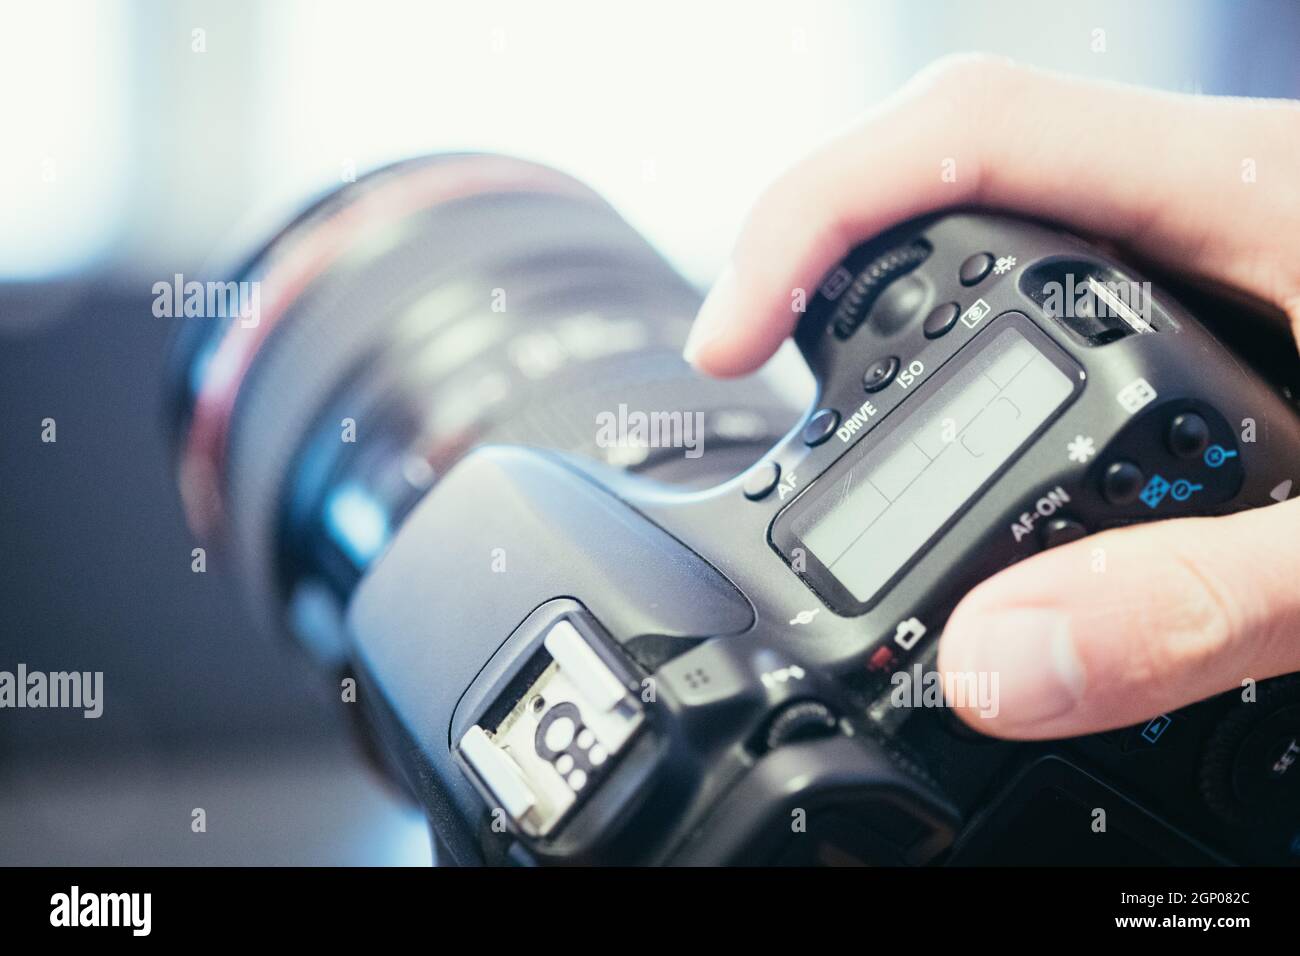 Photographer is holding a professional camera with telephoto lens in his hand, laptop in the blurry background Stock Photo